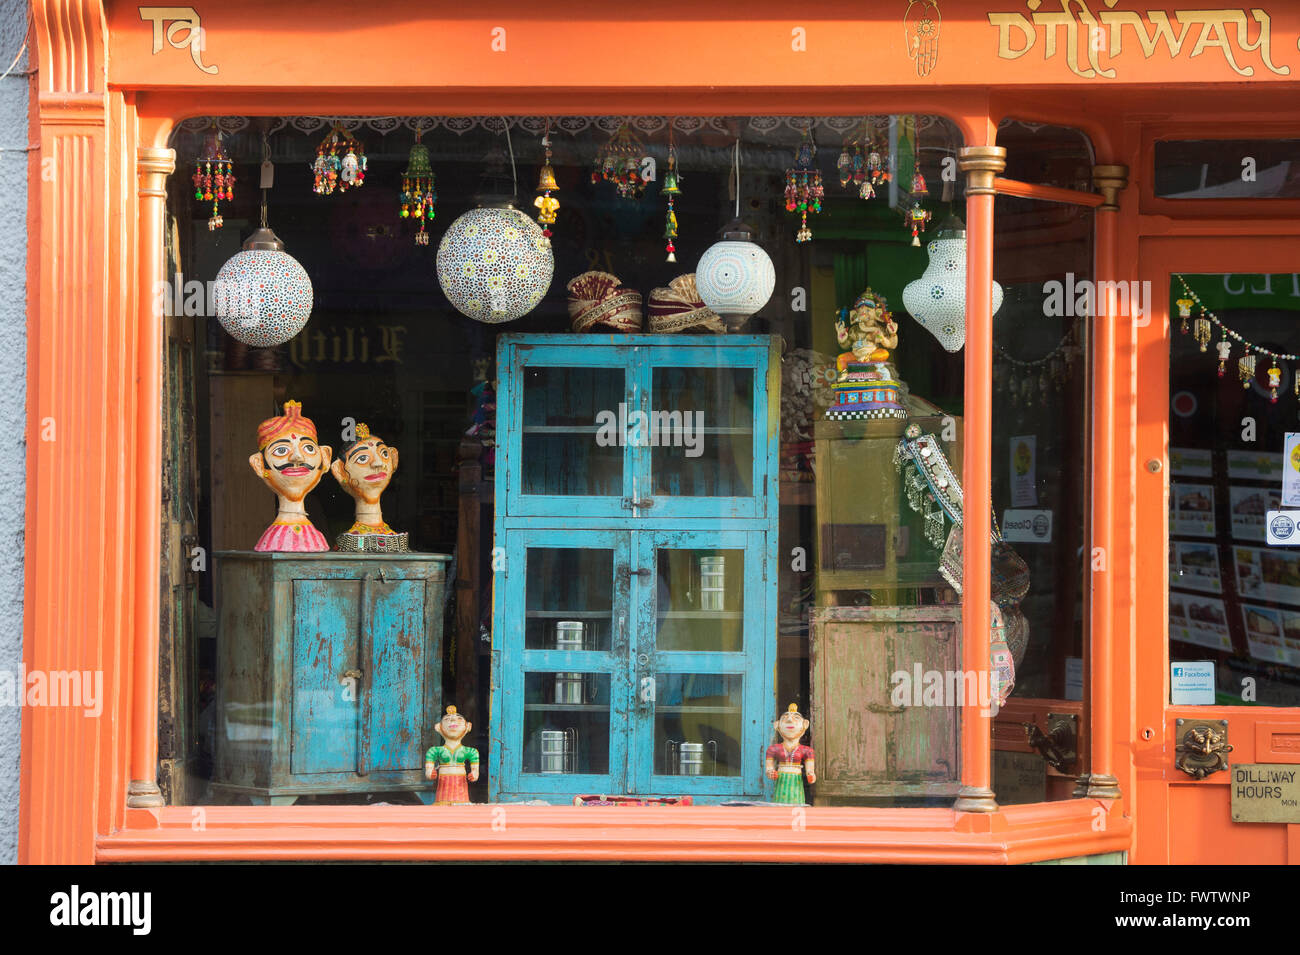 Dilliway and Dilliway ethnic craft shop front. Glastonbury, Somerset, England Stock Photo